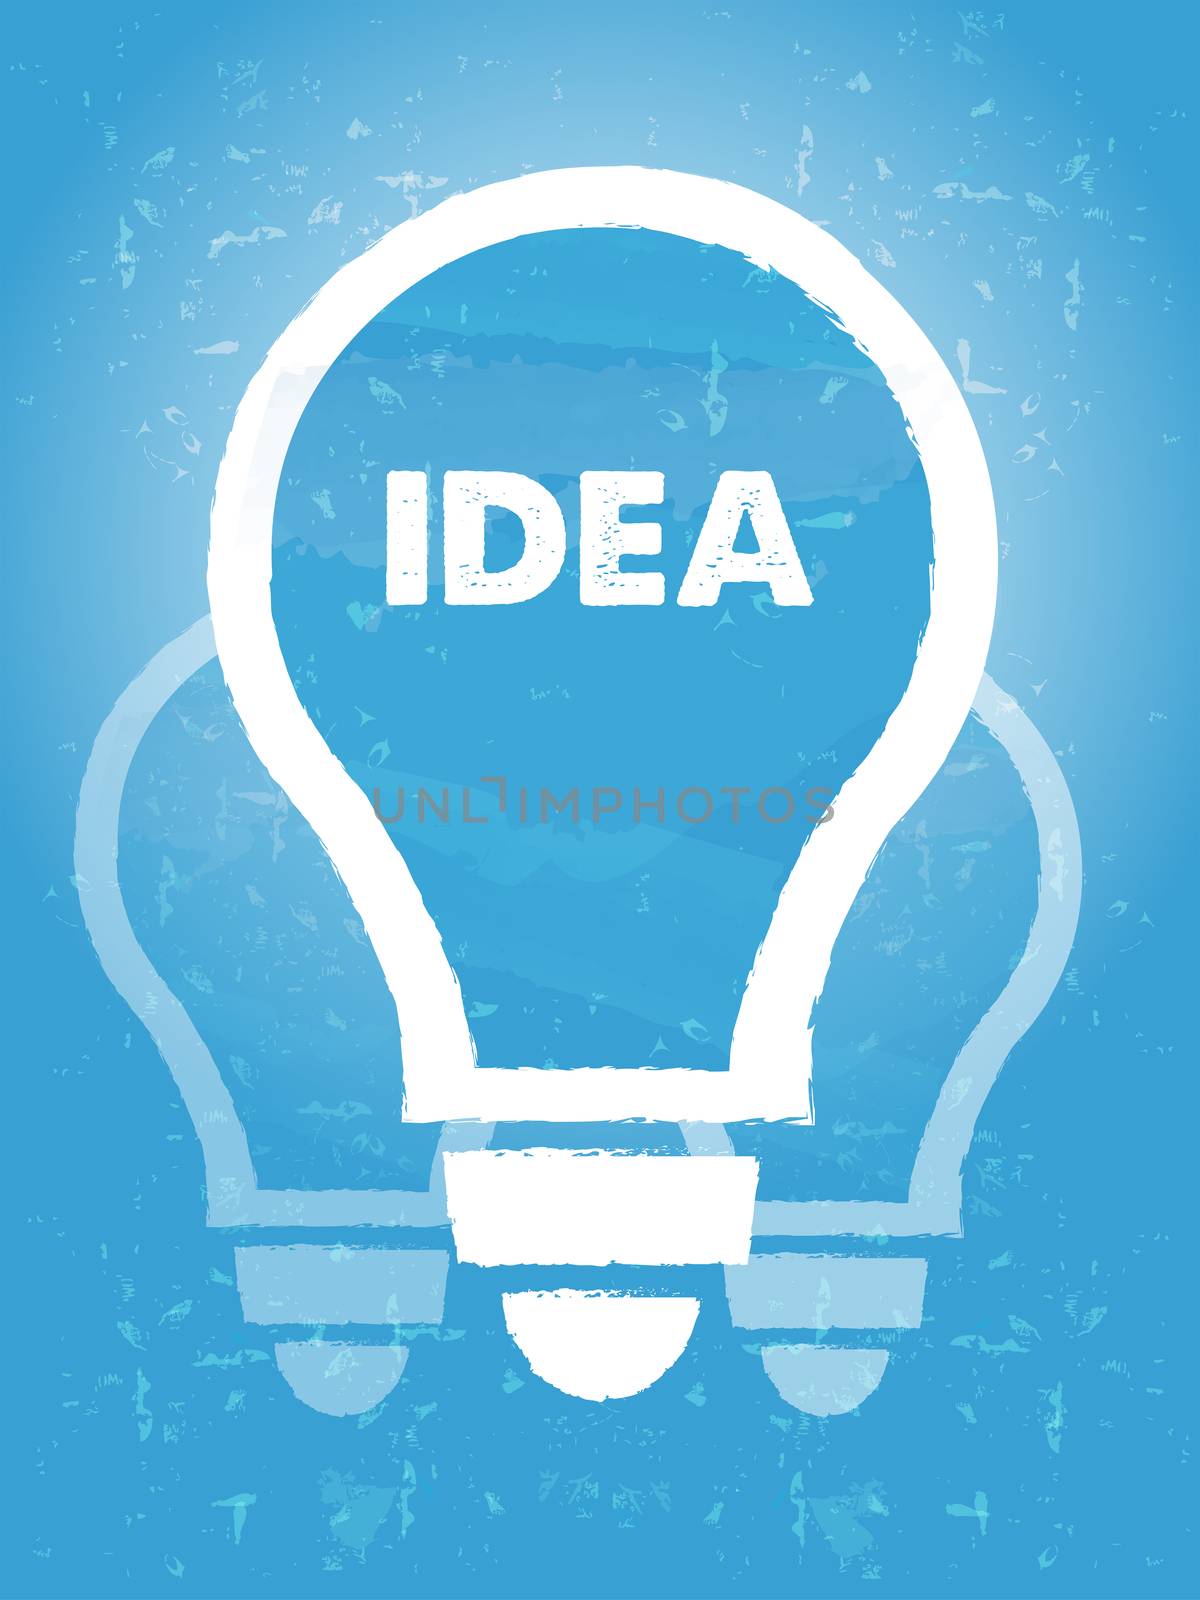 idea in bulb symbol with over blue grunge background by marinini